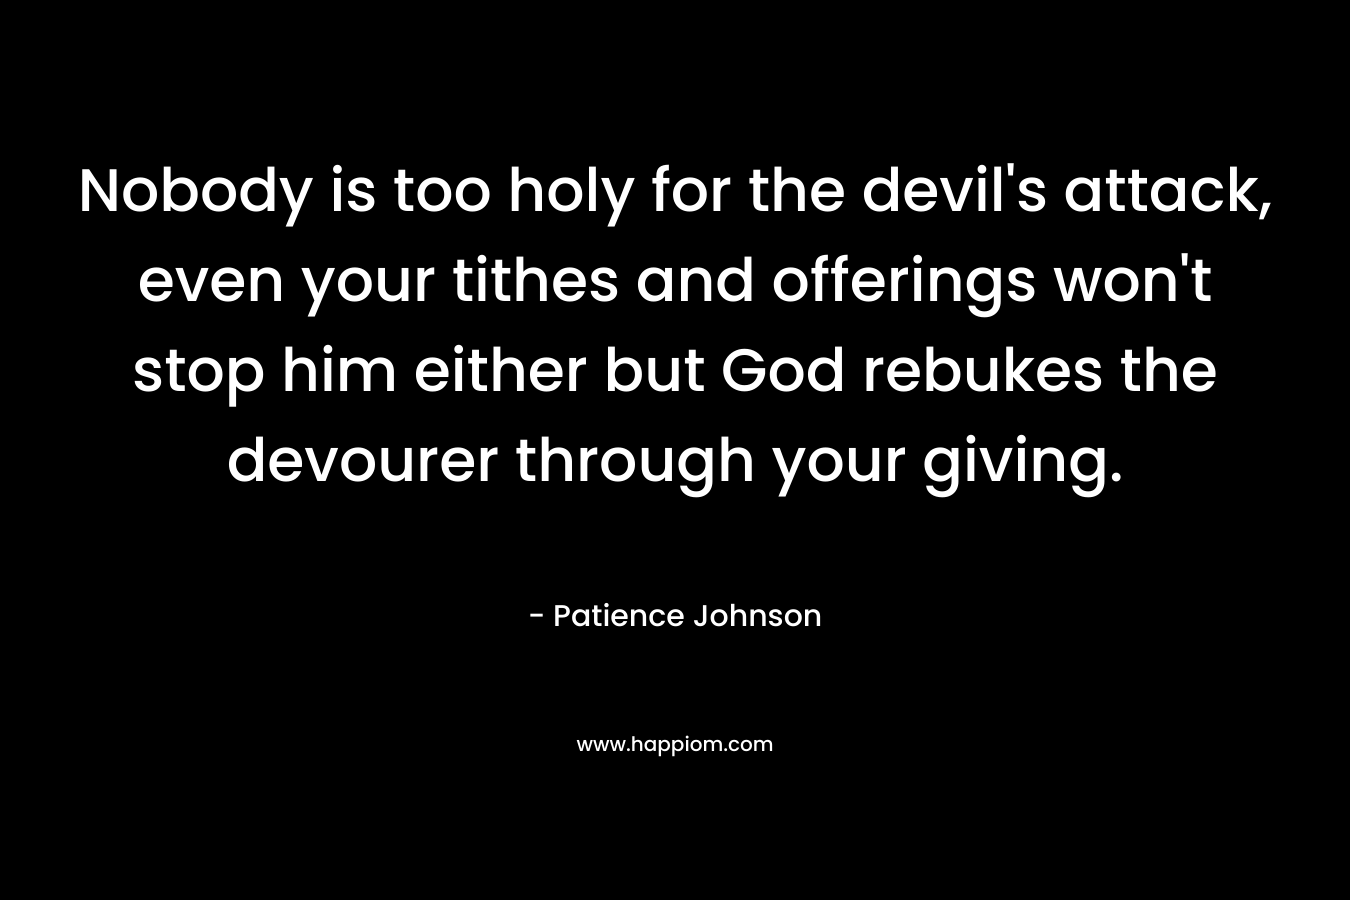 Nobody is too holy for the devil’s attack, even your tithes and offerings won’t stop him either but God rebukes the devourer through your giving. – Patience Johnson